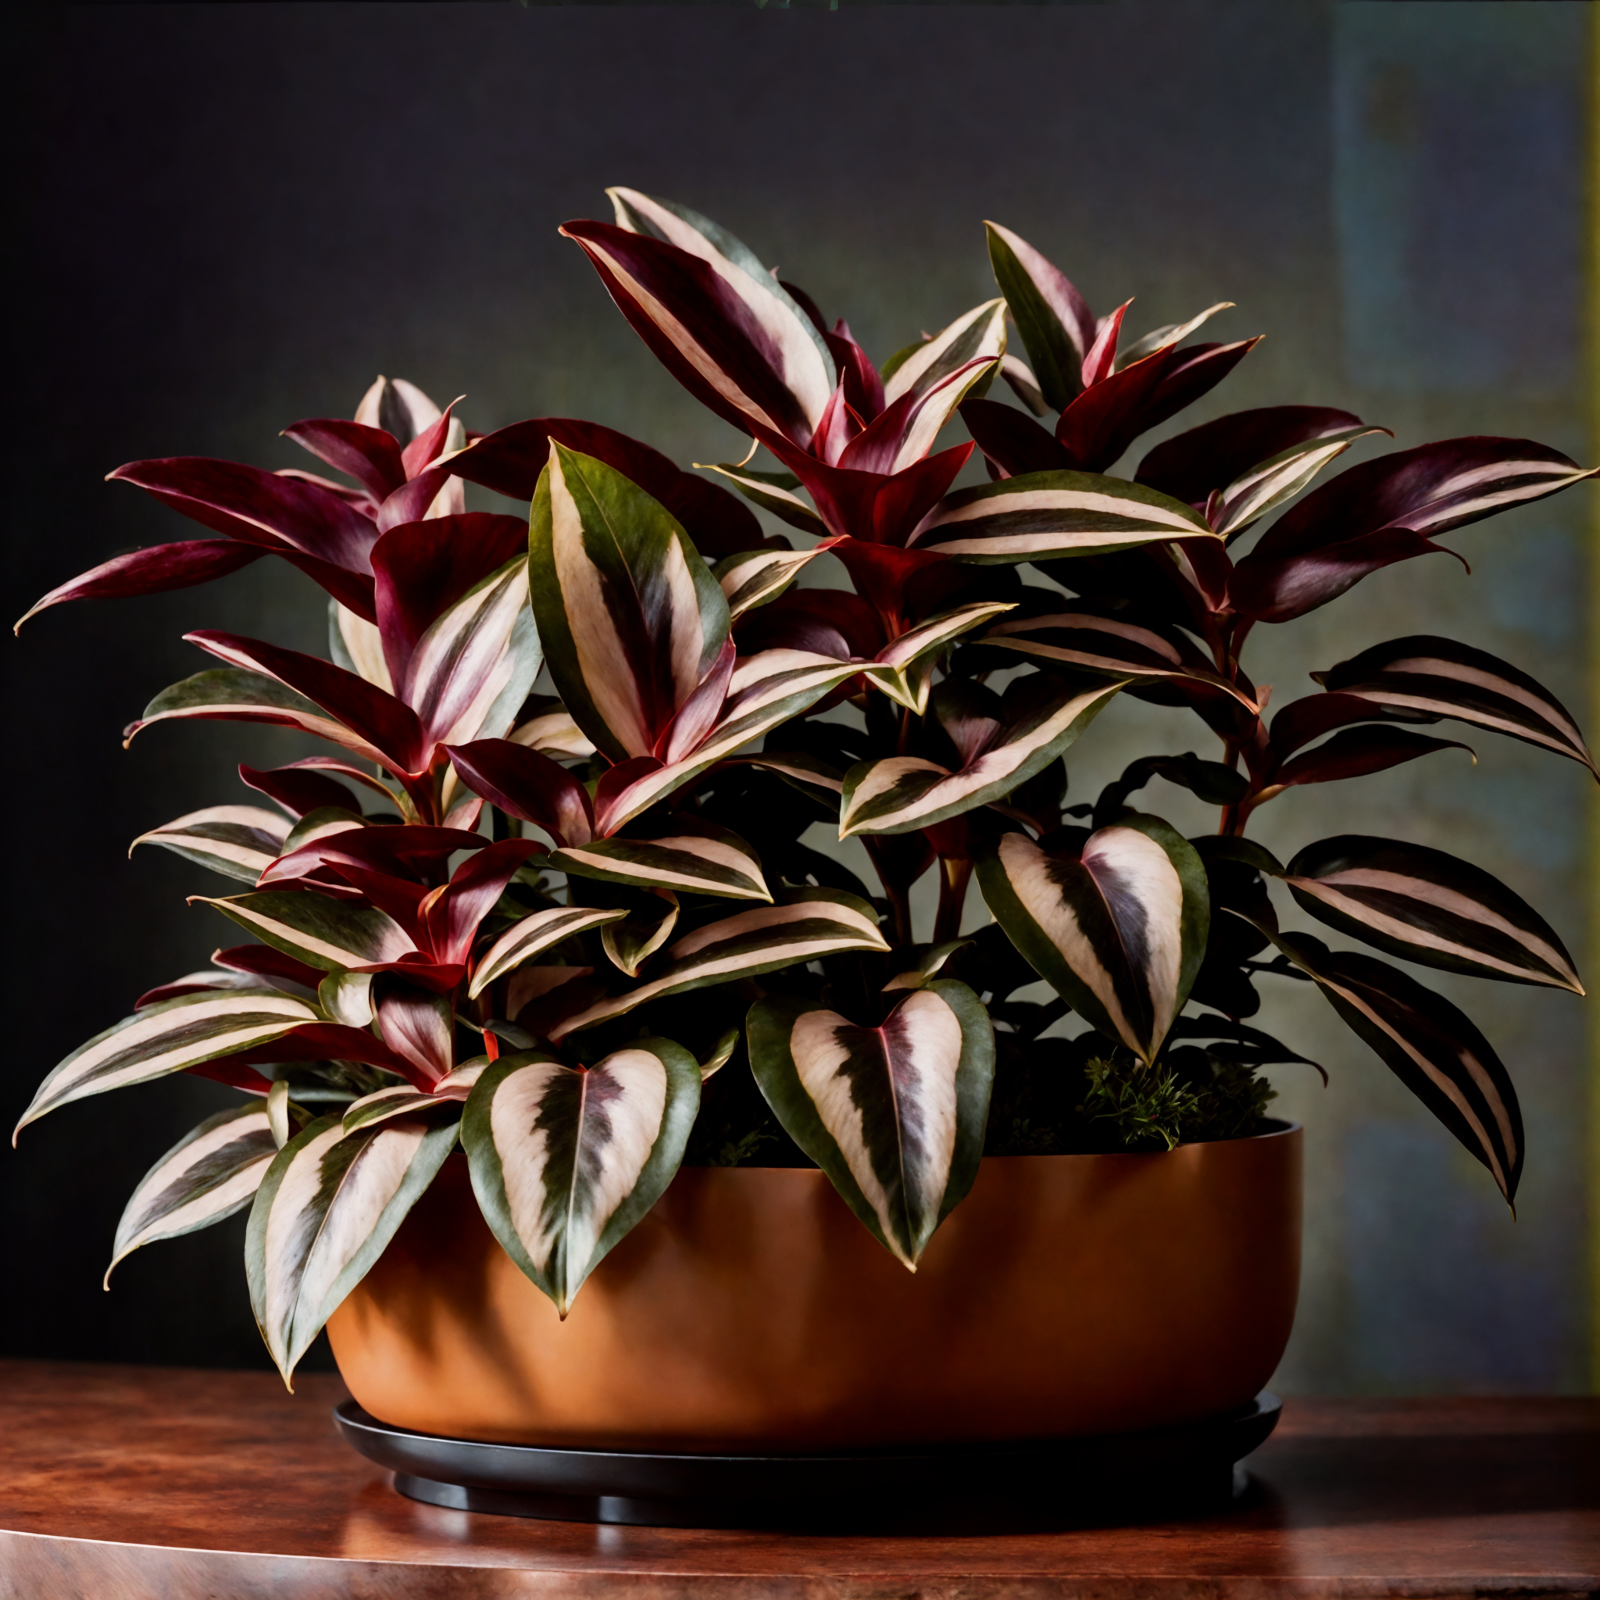 Tradescantia zebrina in a brown vase on a wooden table, with clear lighting and a dark background.